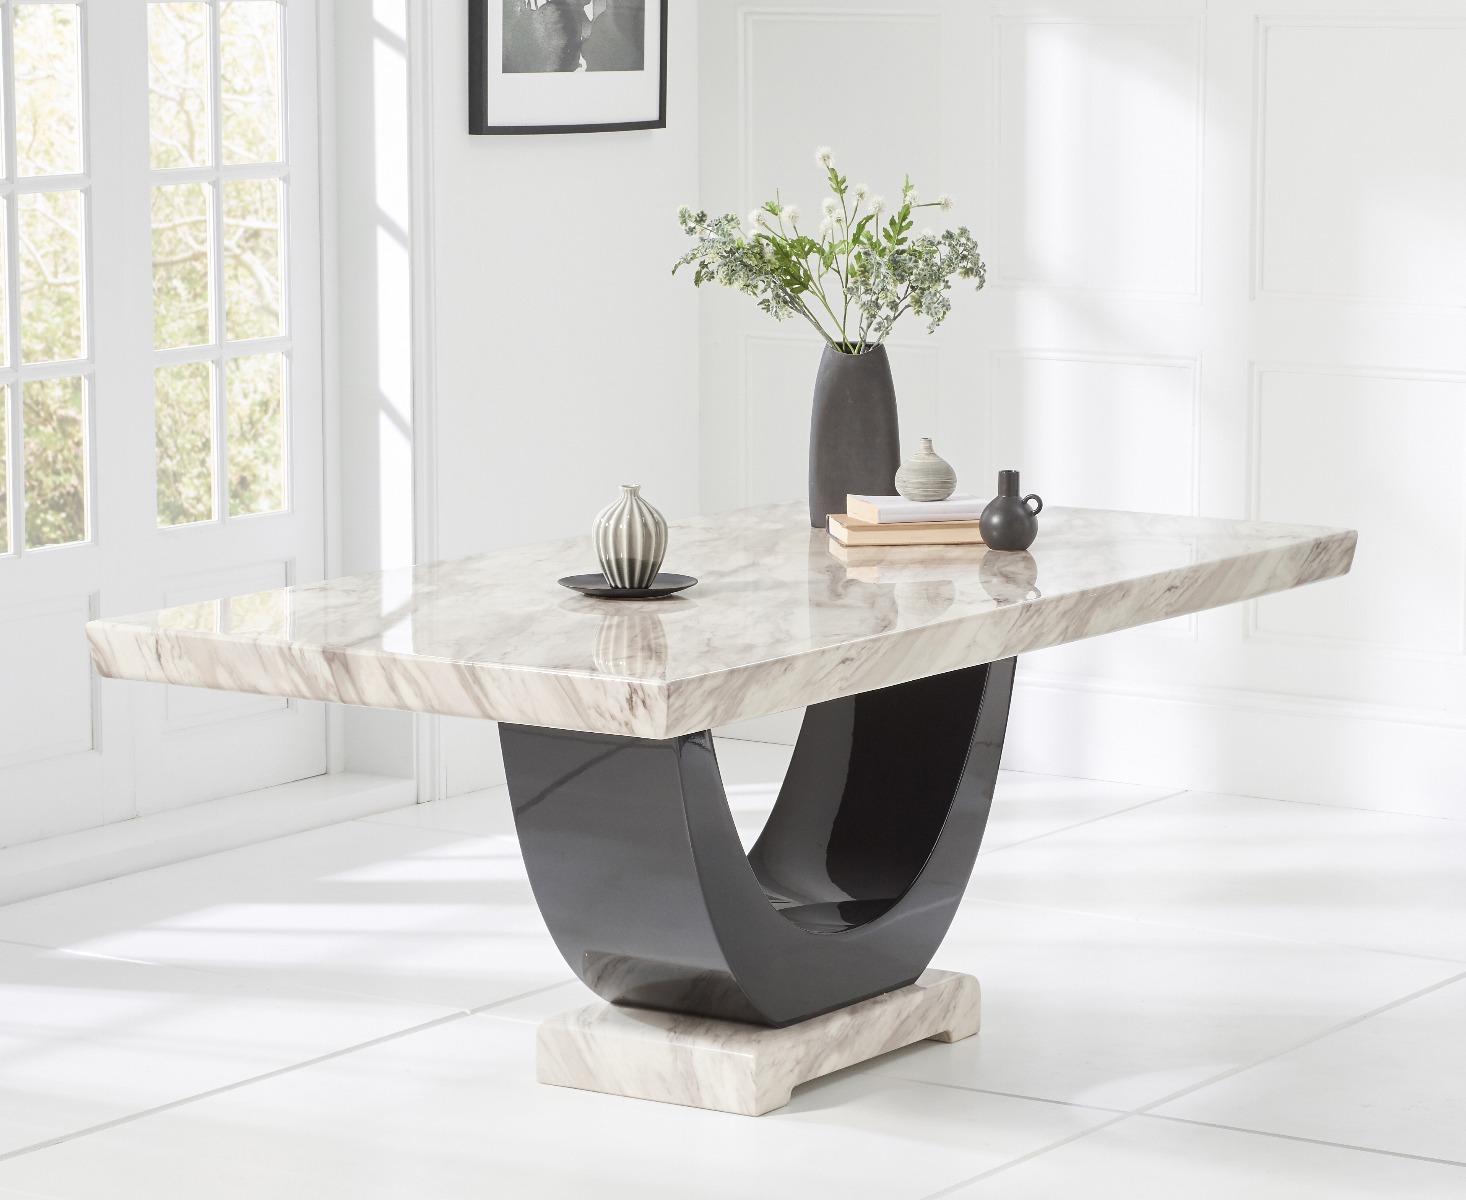 Photo 2 of Raphael 170cm cream and black pedestal marble dining table with 6 grey sophia chairs